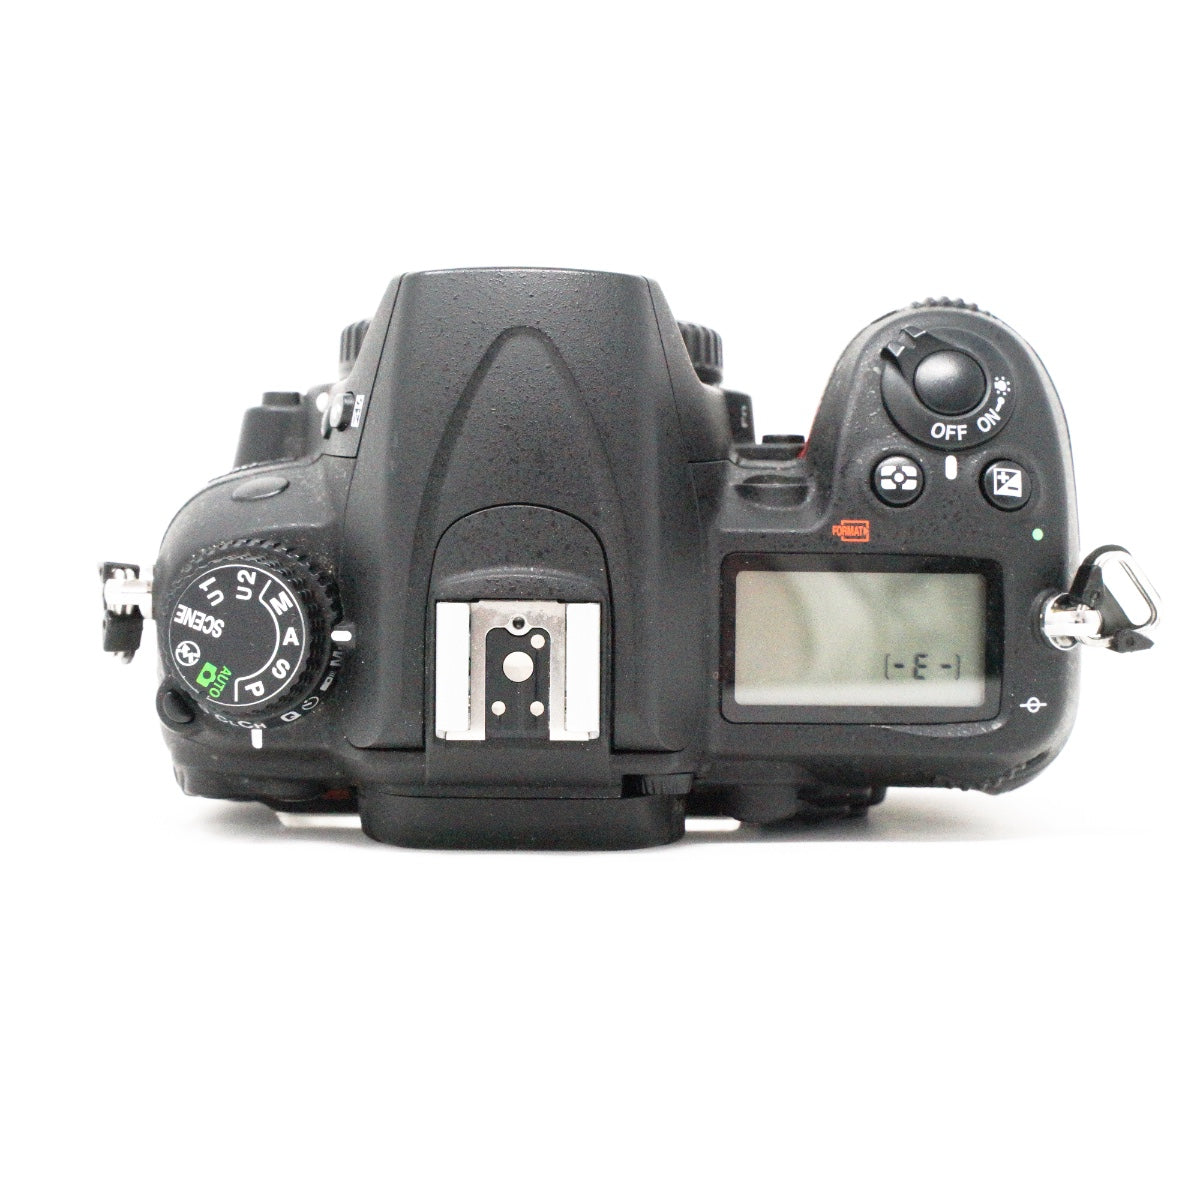 USED Nikon D7000 Camera Body Only - Battery, Charger, Strap\